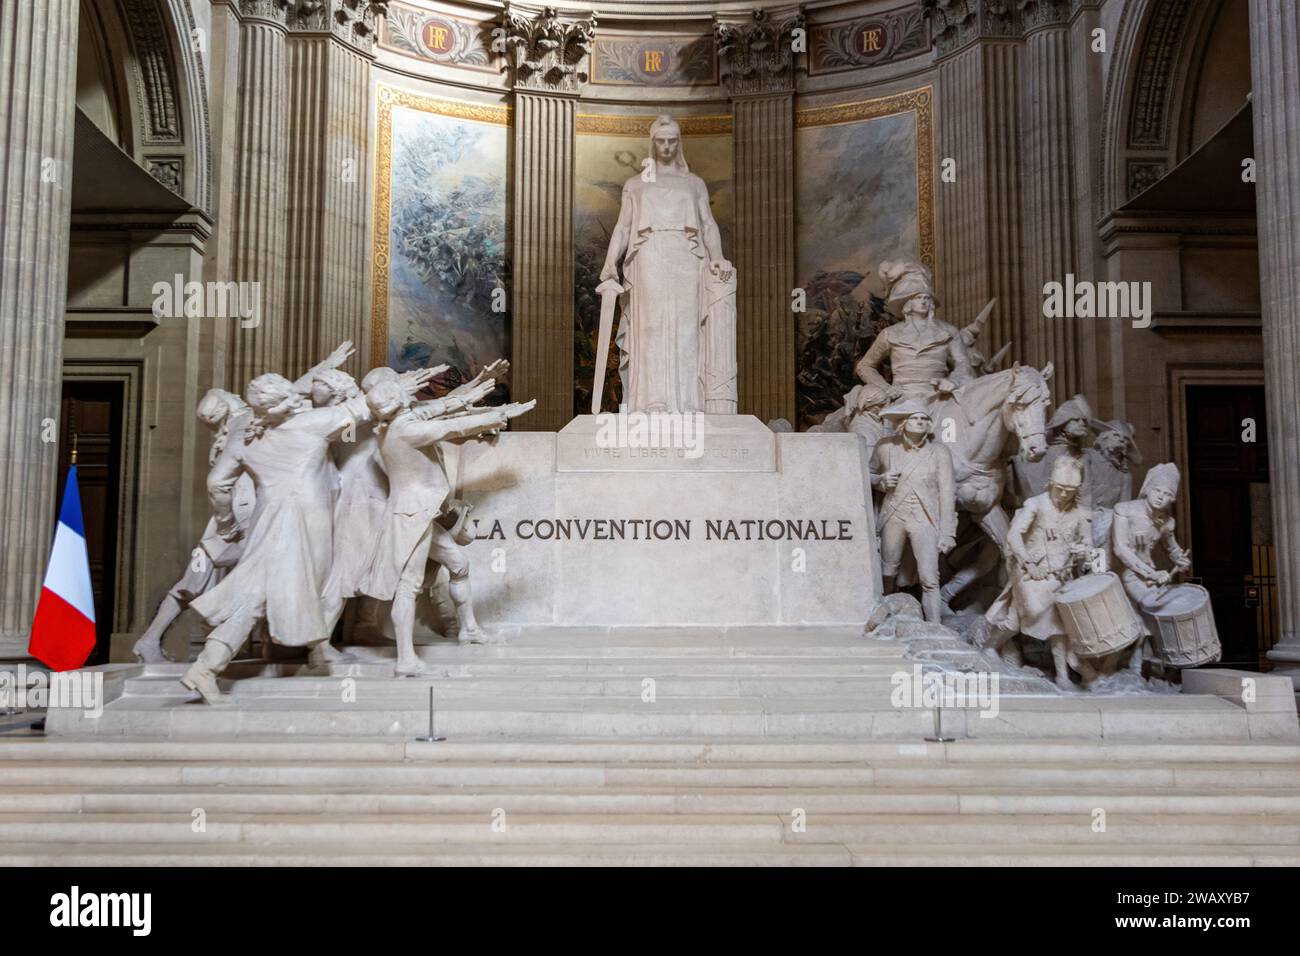 Altar dedicated to the National Convention of the French Revolution inside the Pantheon de Paris. France Stock Photo